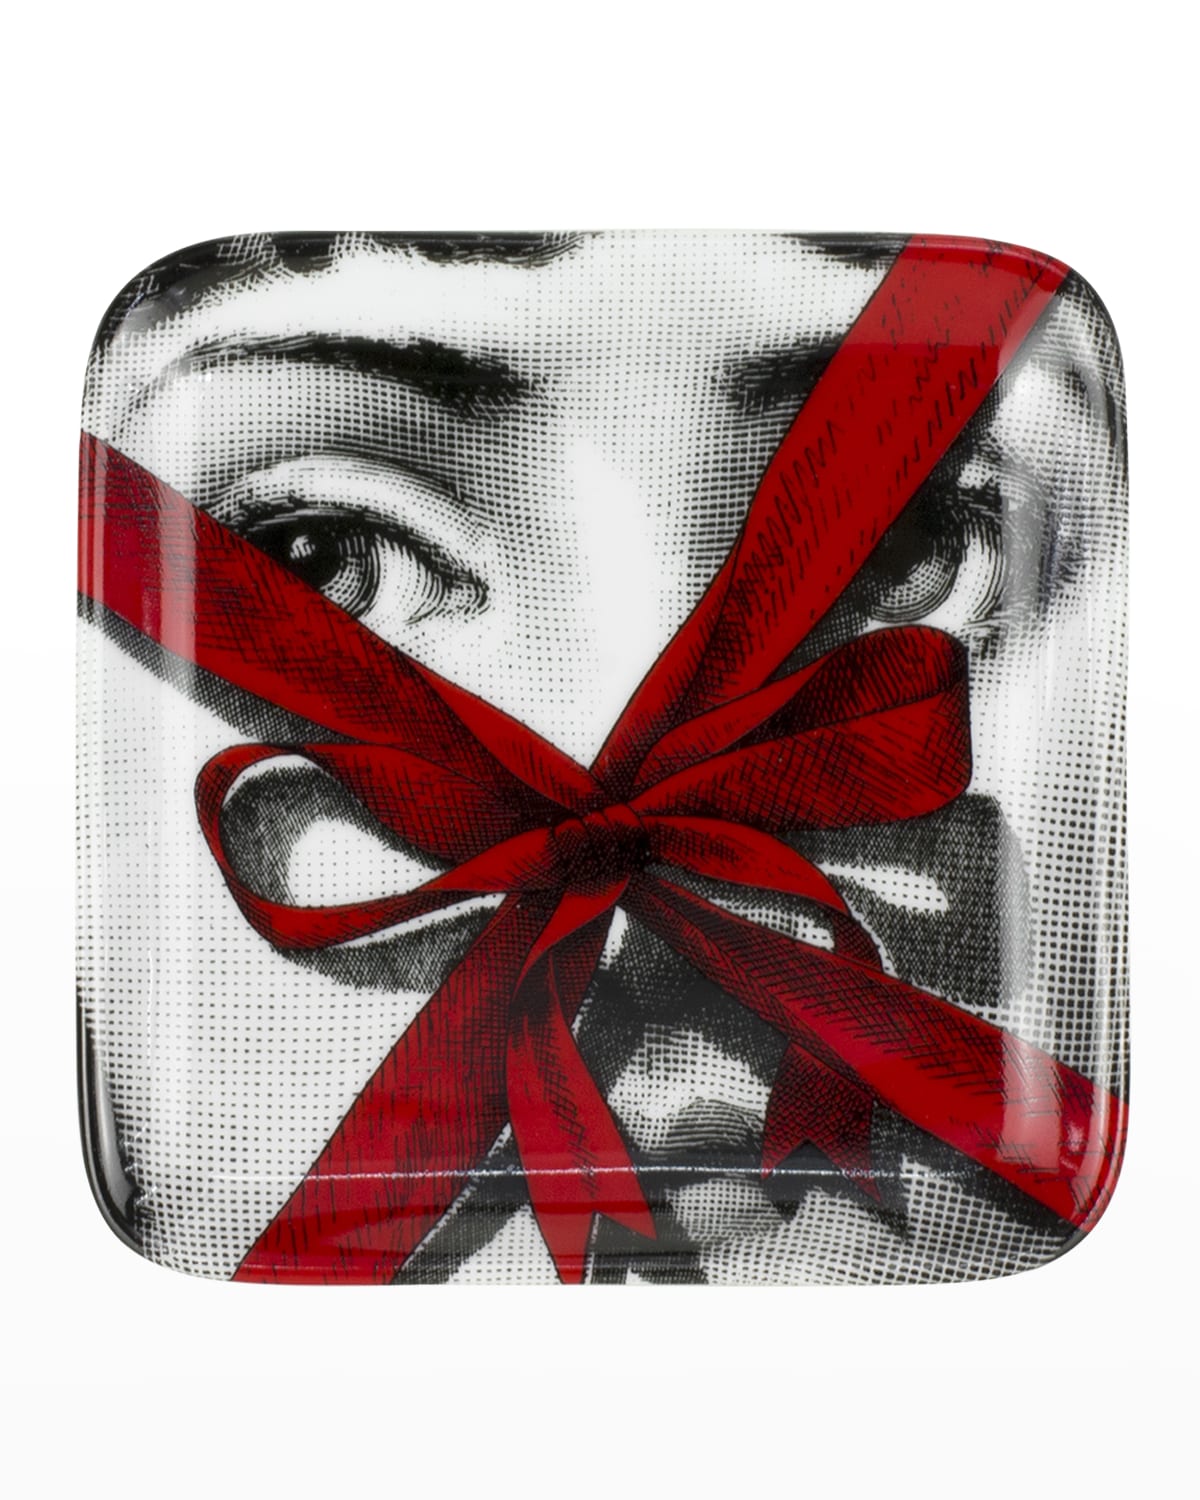 Shop Fornasetti Square Ashtray Red Bow Gift In Blackred